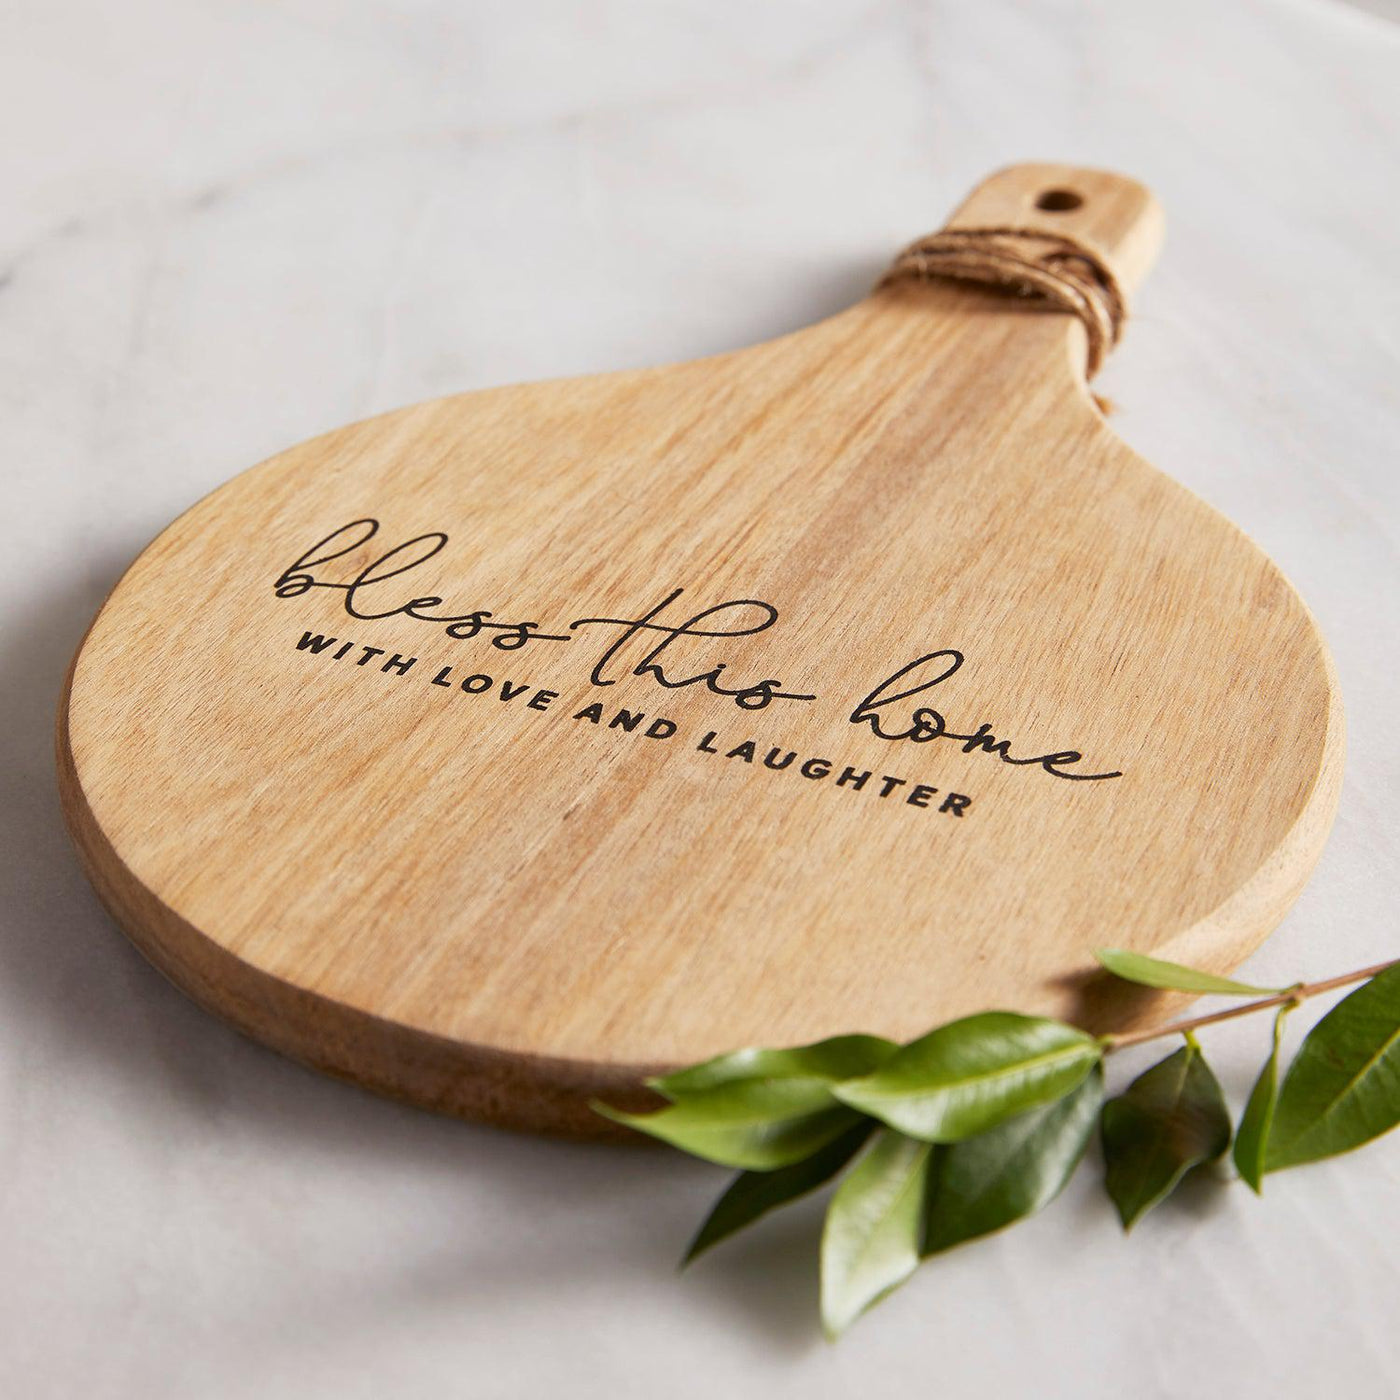  Wooden Cheese Board Godgirl Gifts